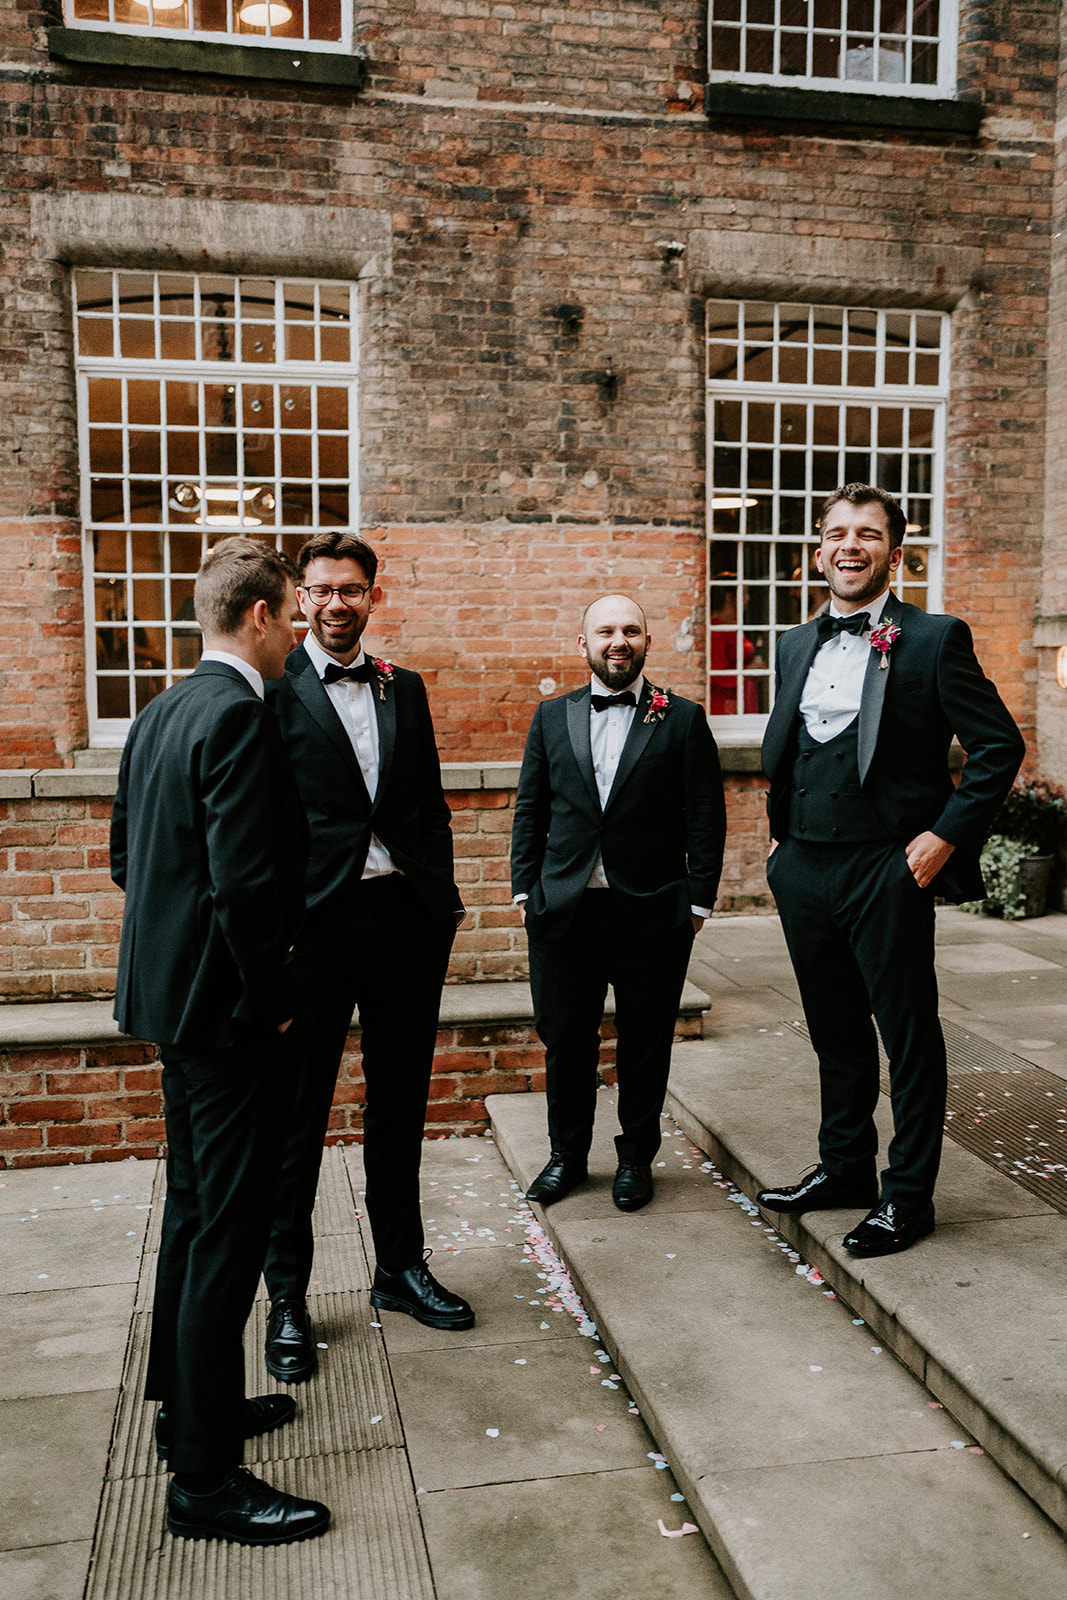 A Black Tie Wedding with Pops of Pink for Jamie & Seb at The West Mill, Derby